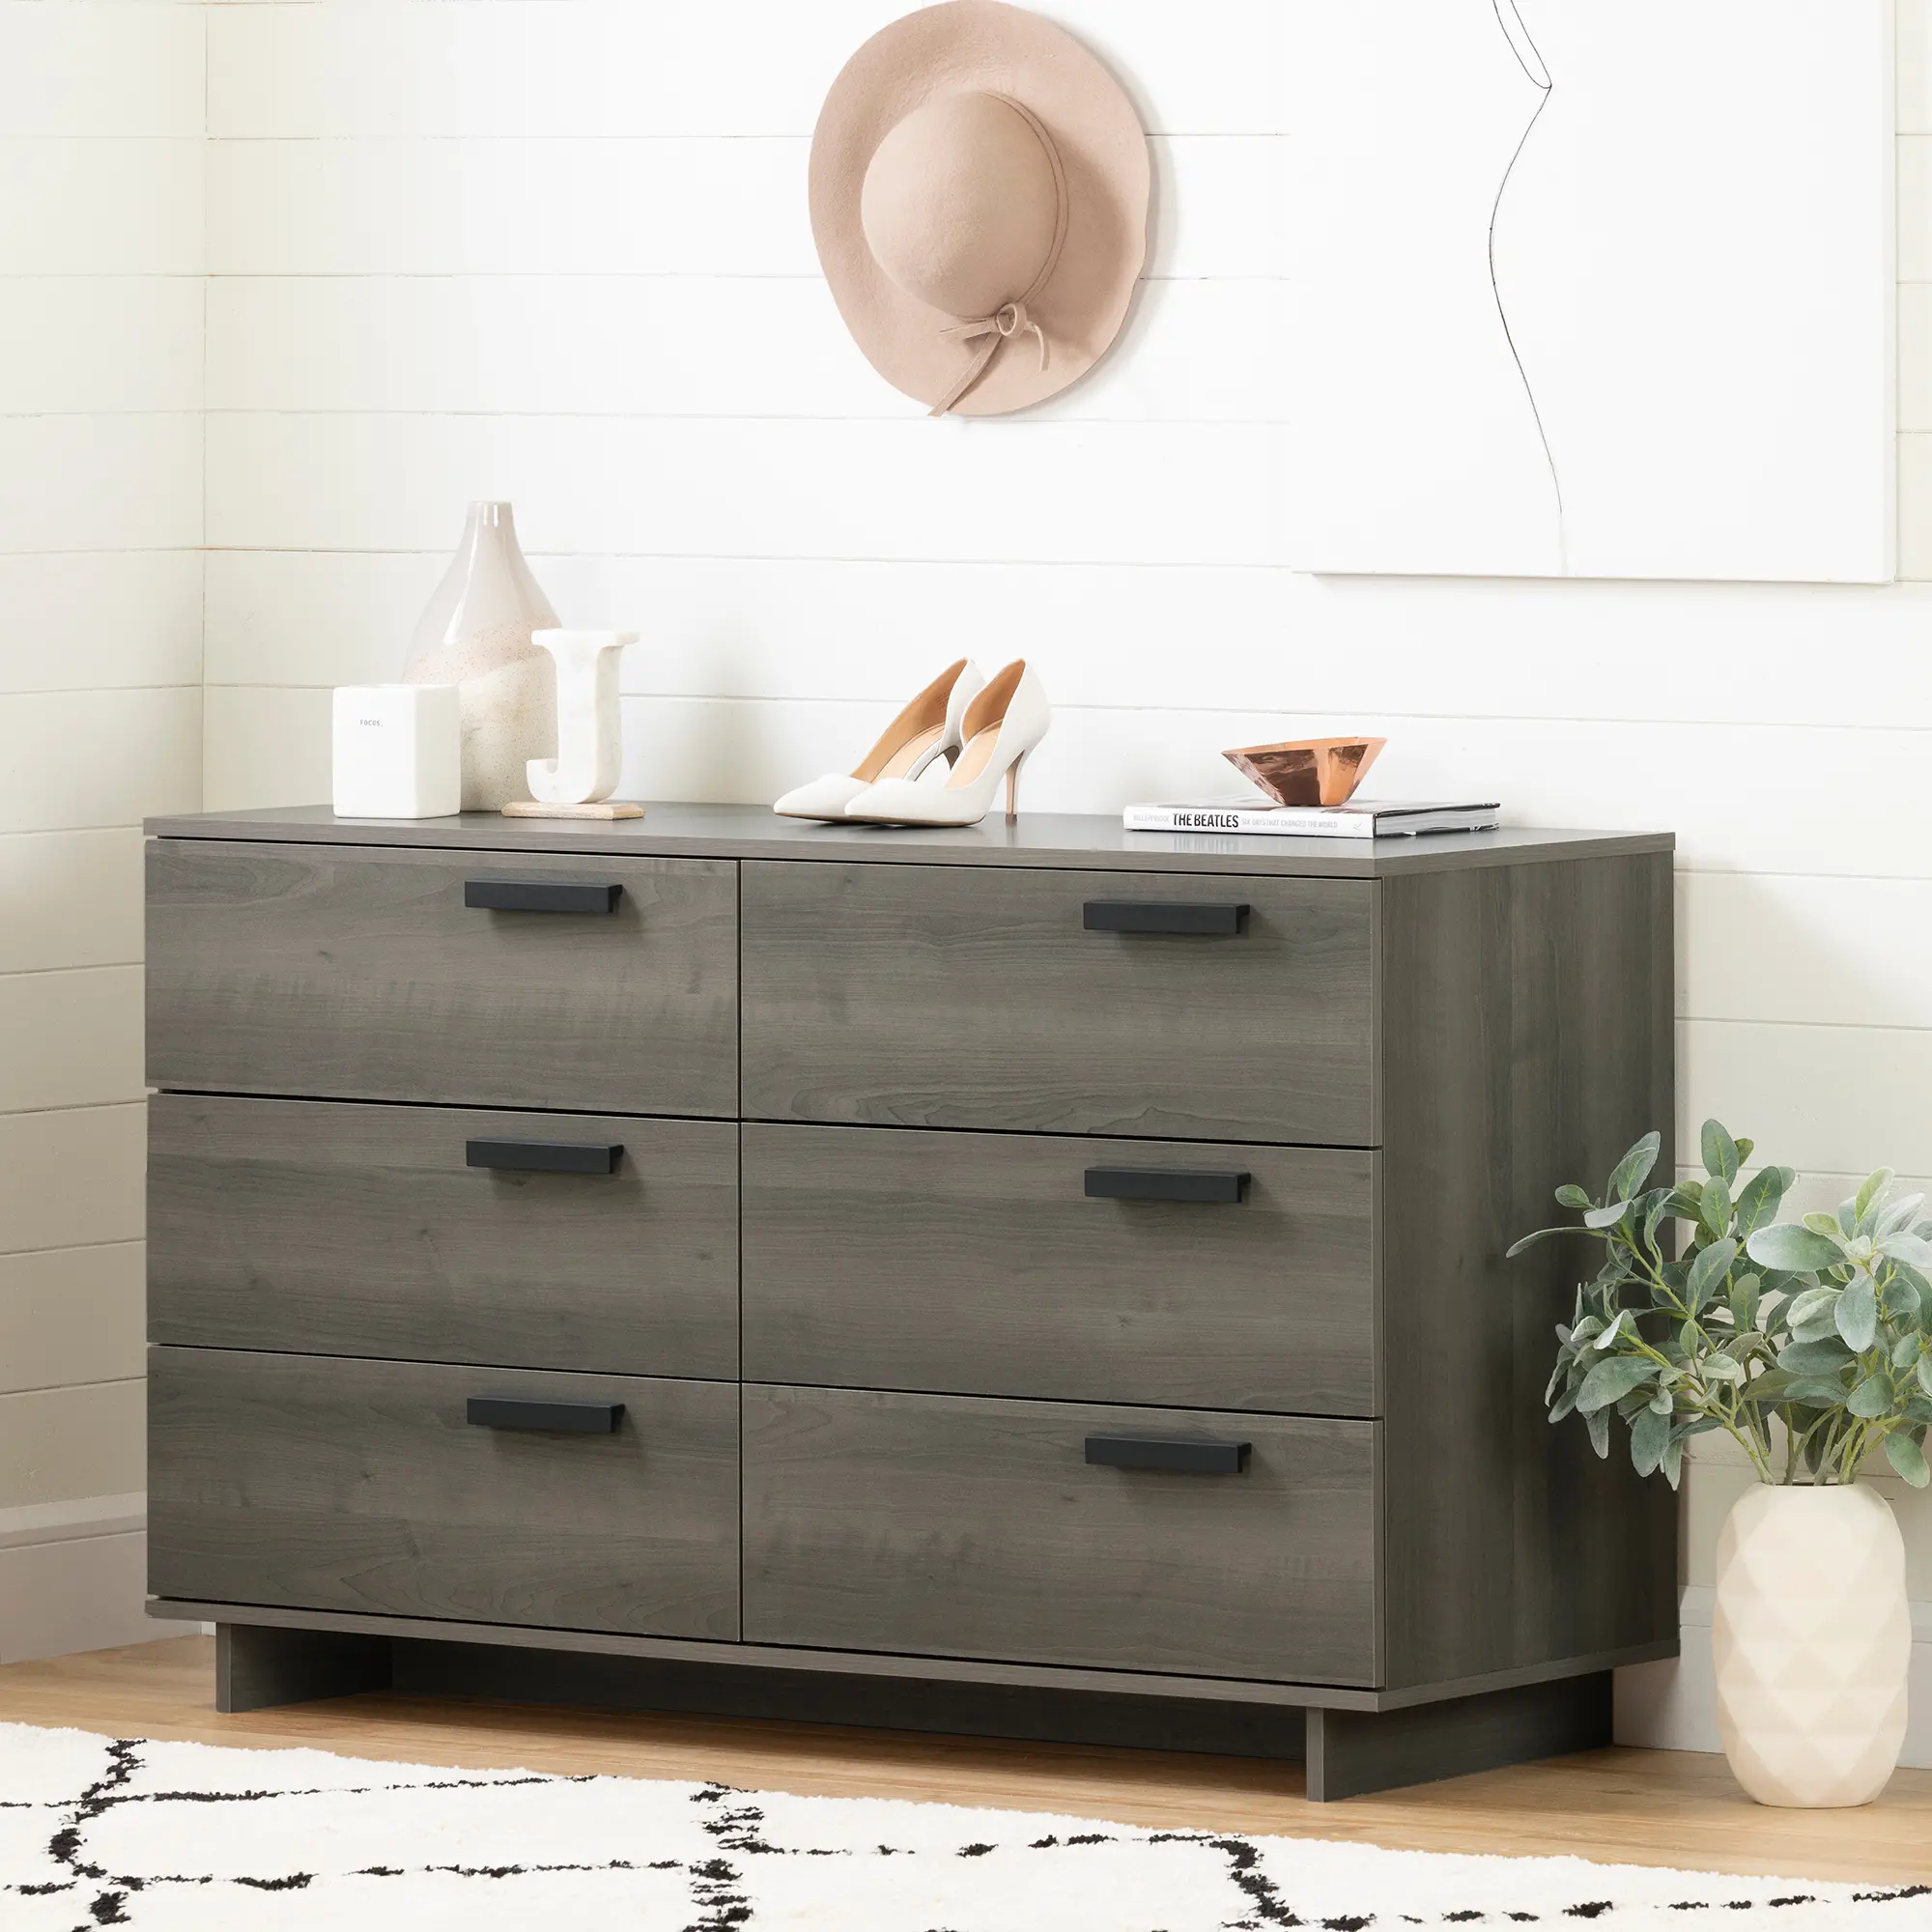 12227 Modern Gray Maple 6 Drawer Double - South Shore sku 12227